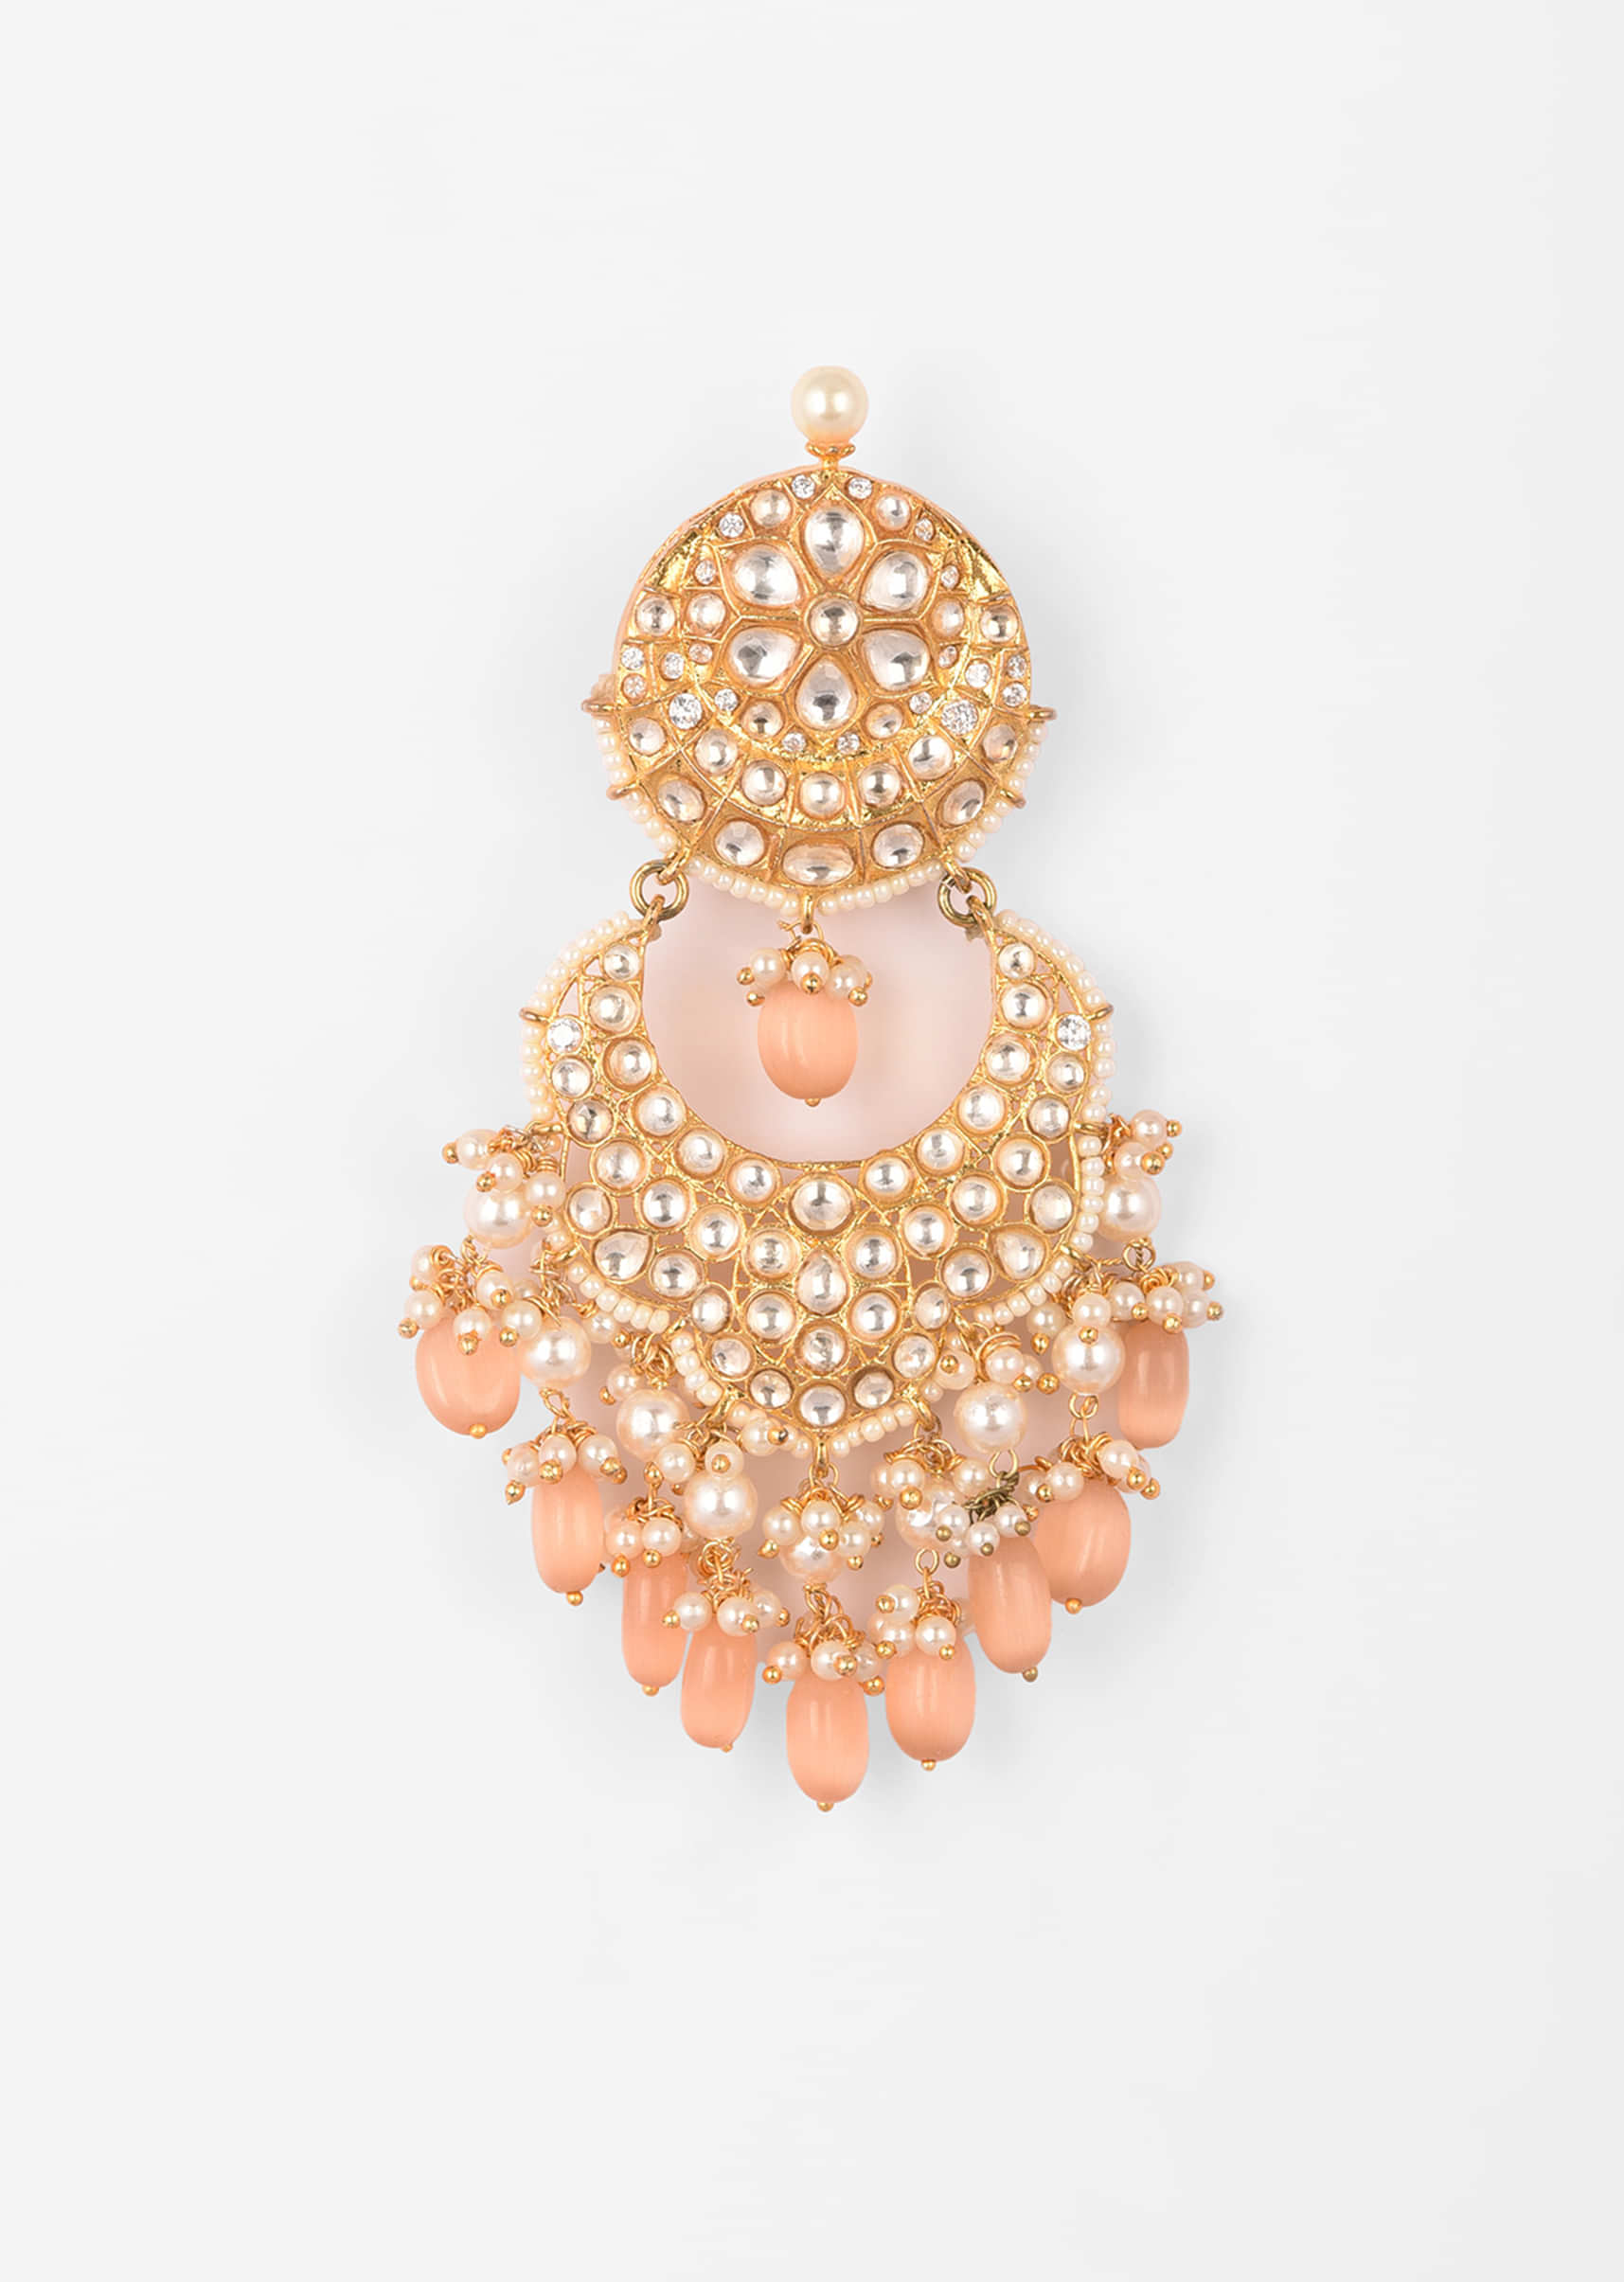 Gold Kundan Earrings With Dangling Pearl And Peach Bead Fringes 